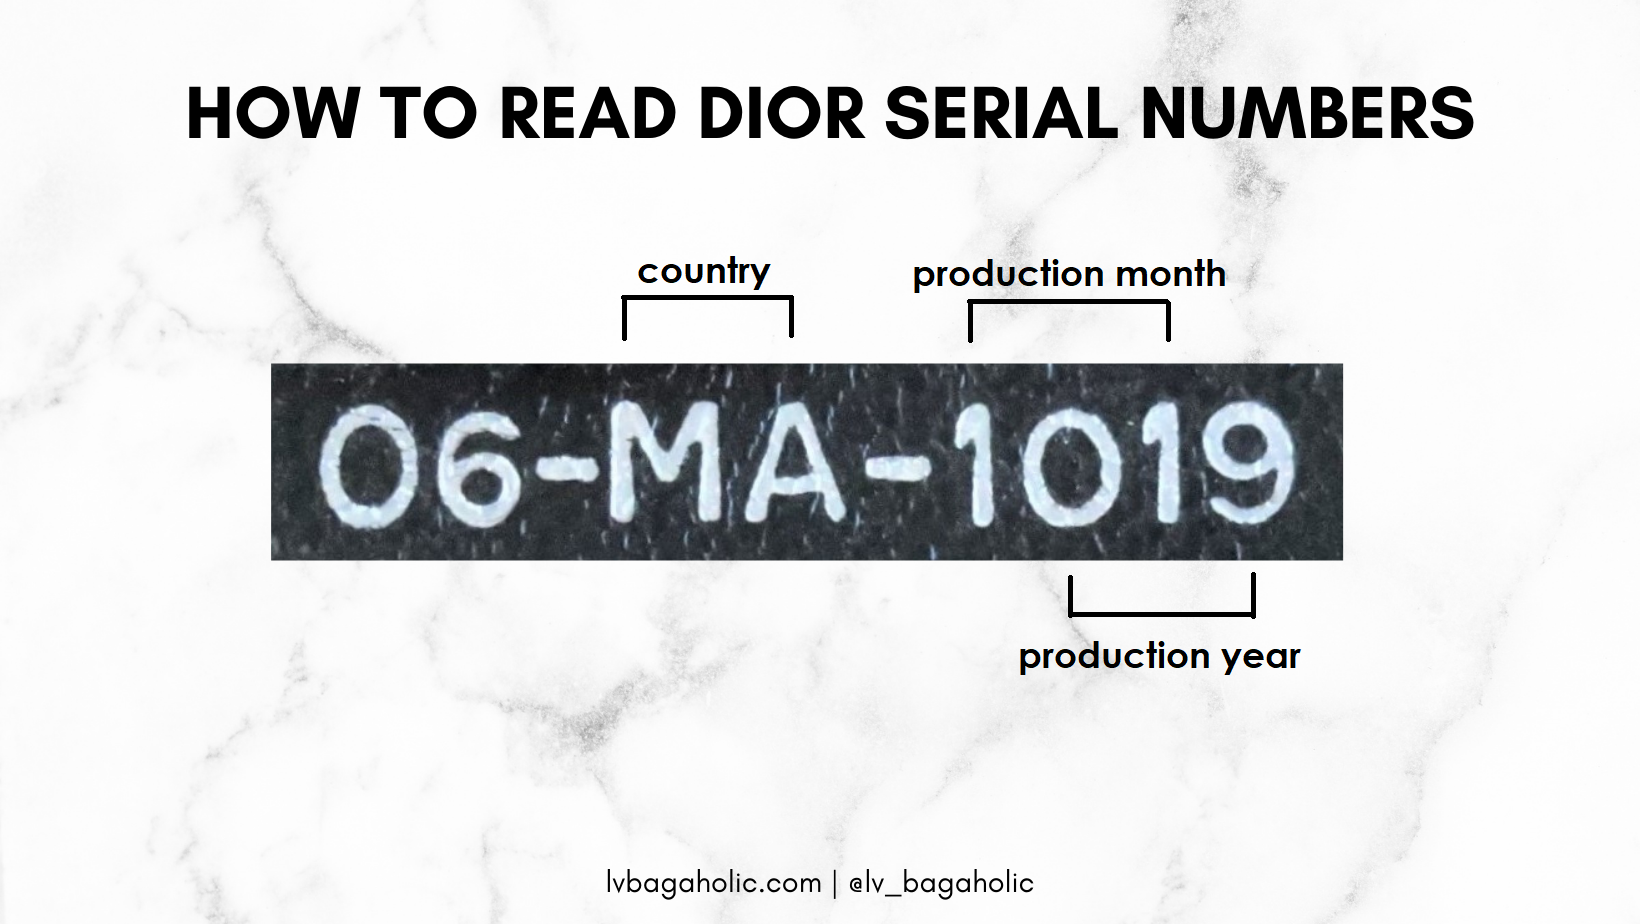 how to read dior date codes/serial numbers